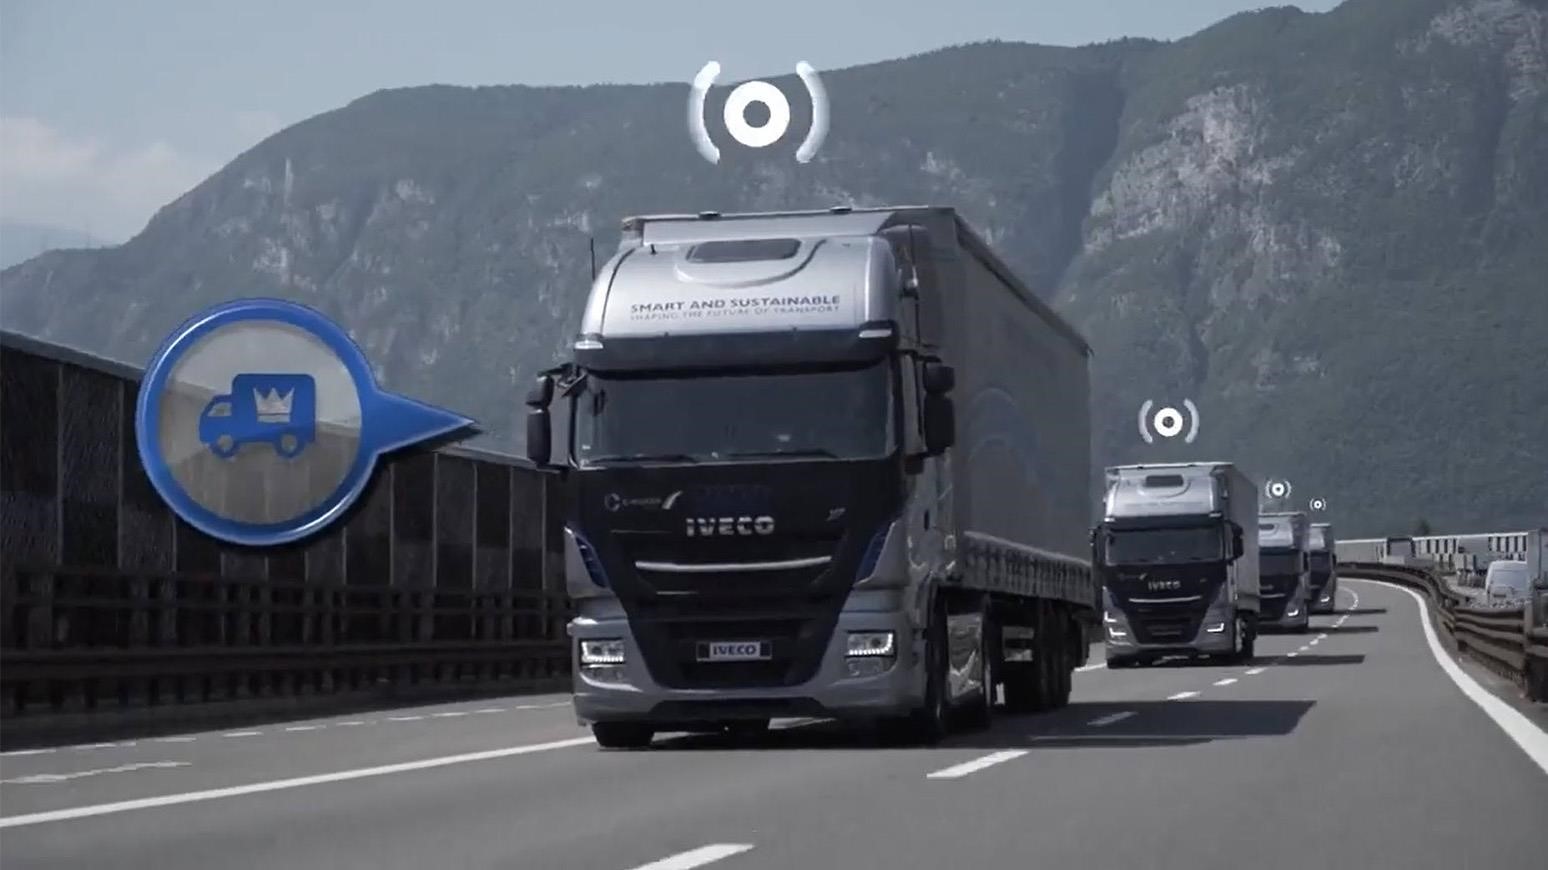 IVECO Conducts 4-Vehicle Platooning Pilot In Conjunction With C-Roads Italy